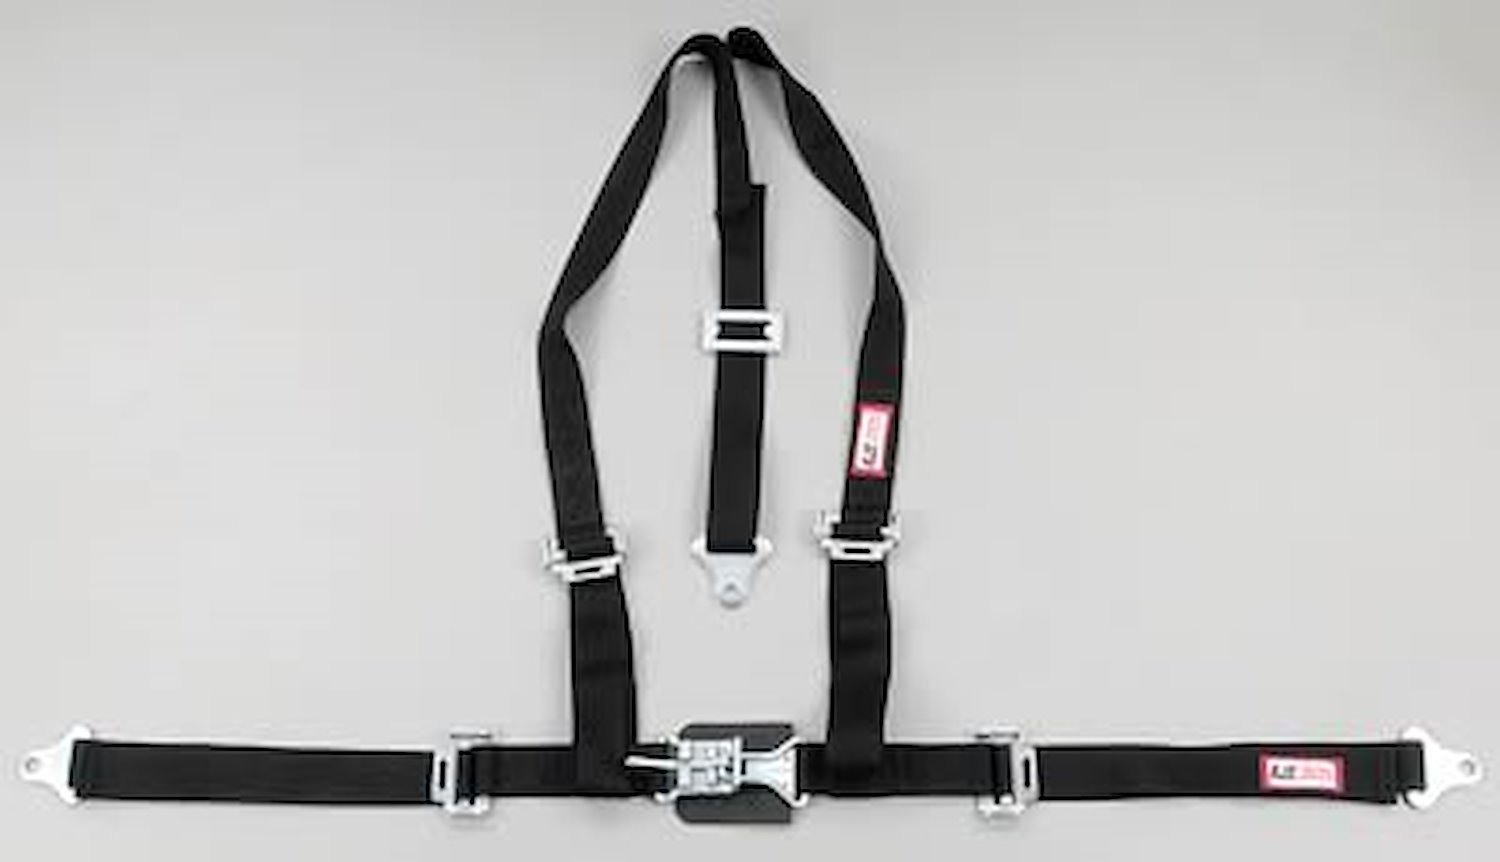 NON-SFI L&L HARNESS 2 PULL UP Lap Belt SNAP SEWN IN 2 S.H. Y FLOOR Mount WRAP/BOLT GRAY